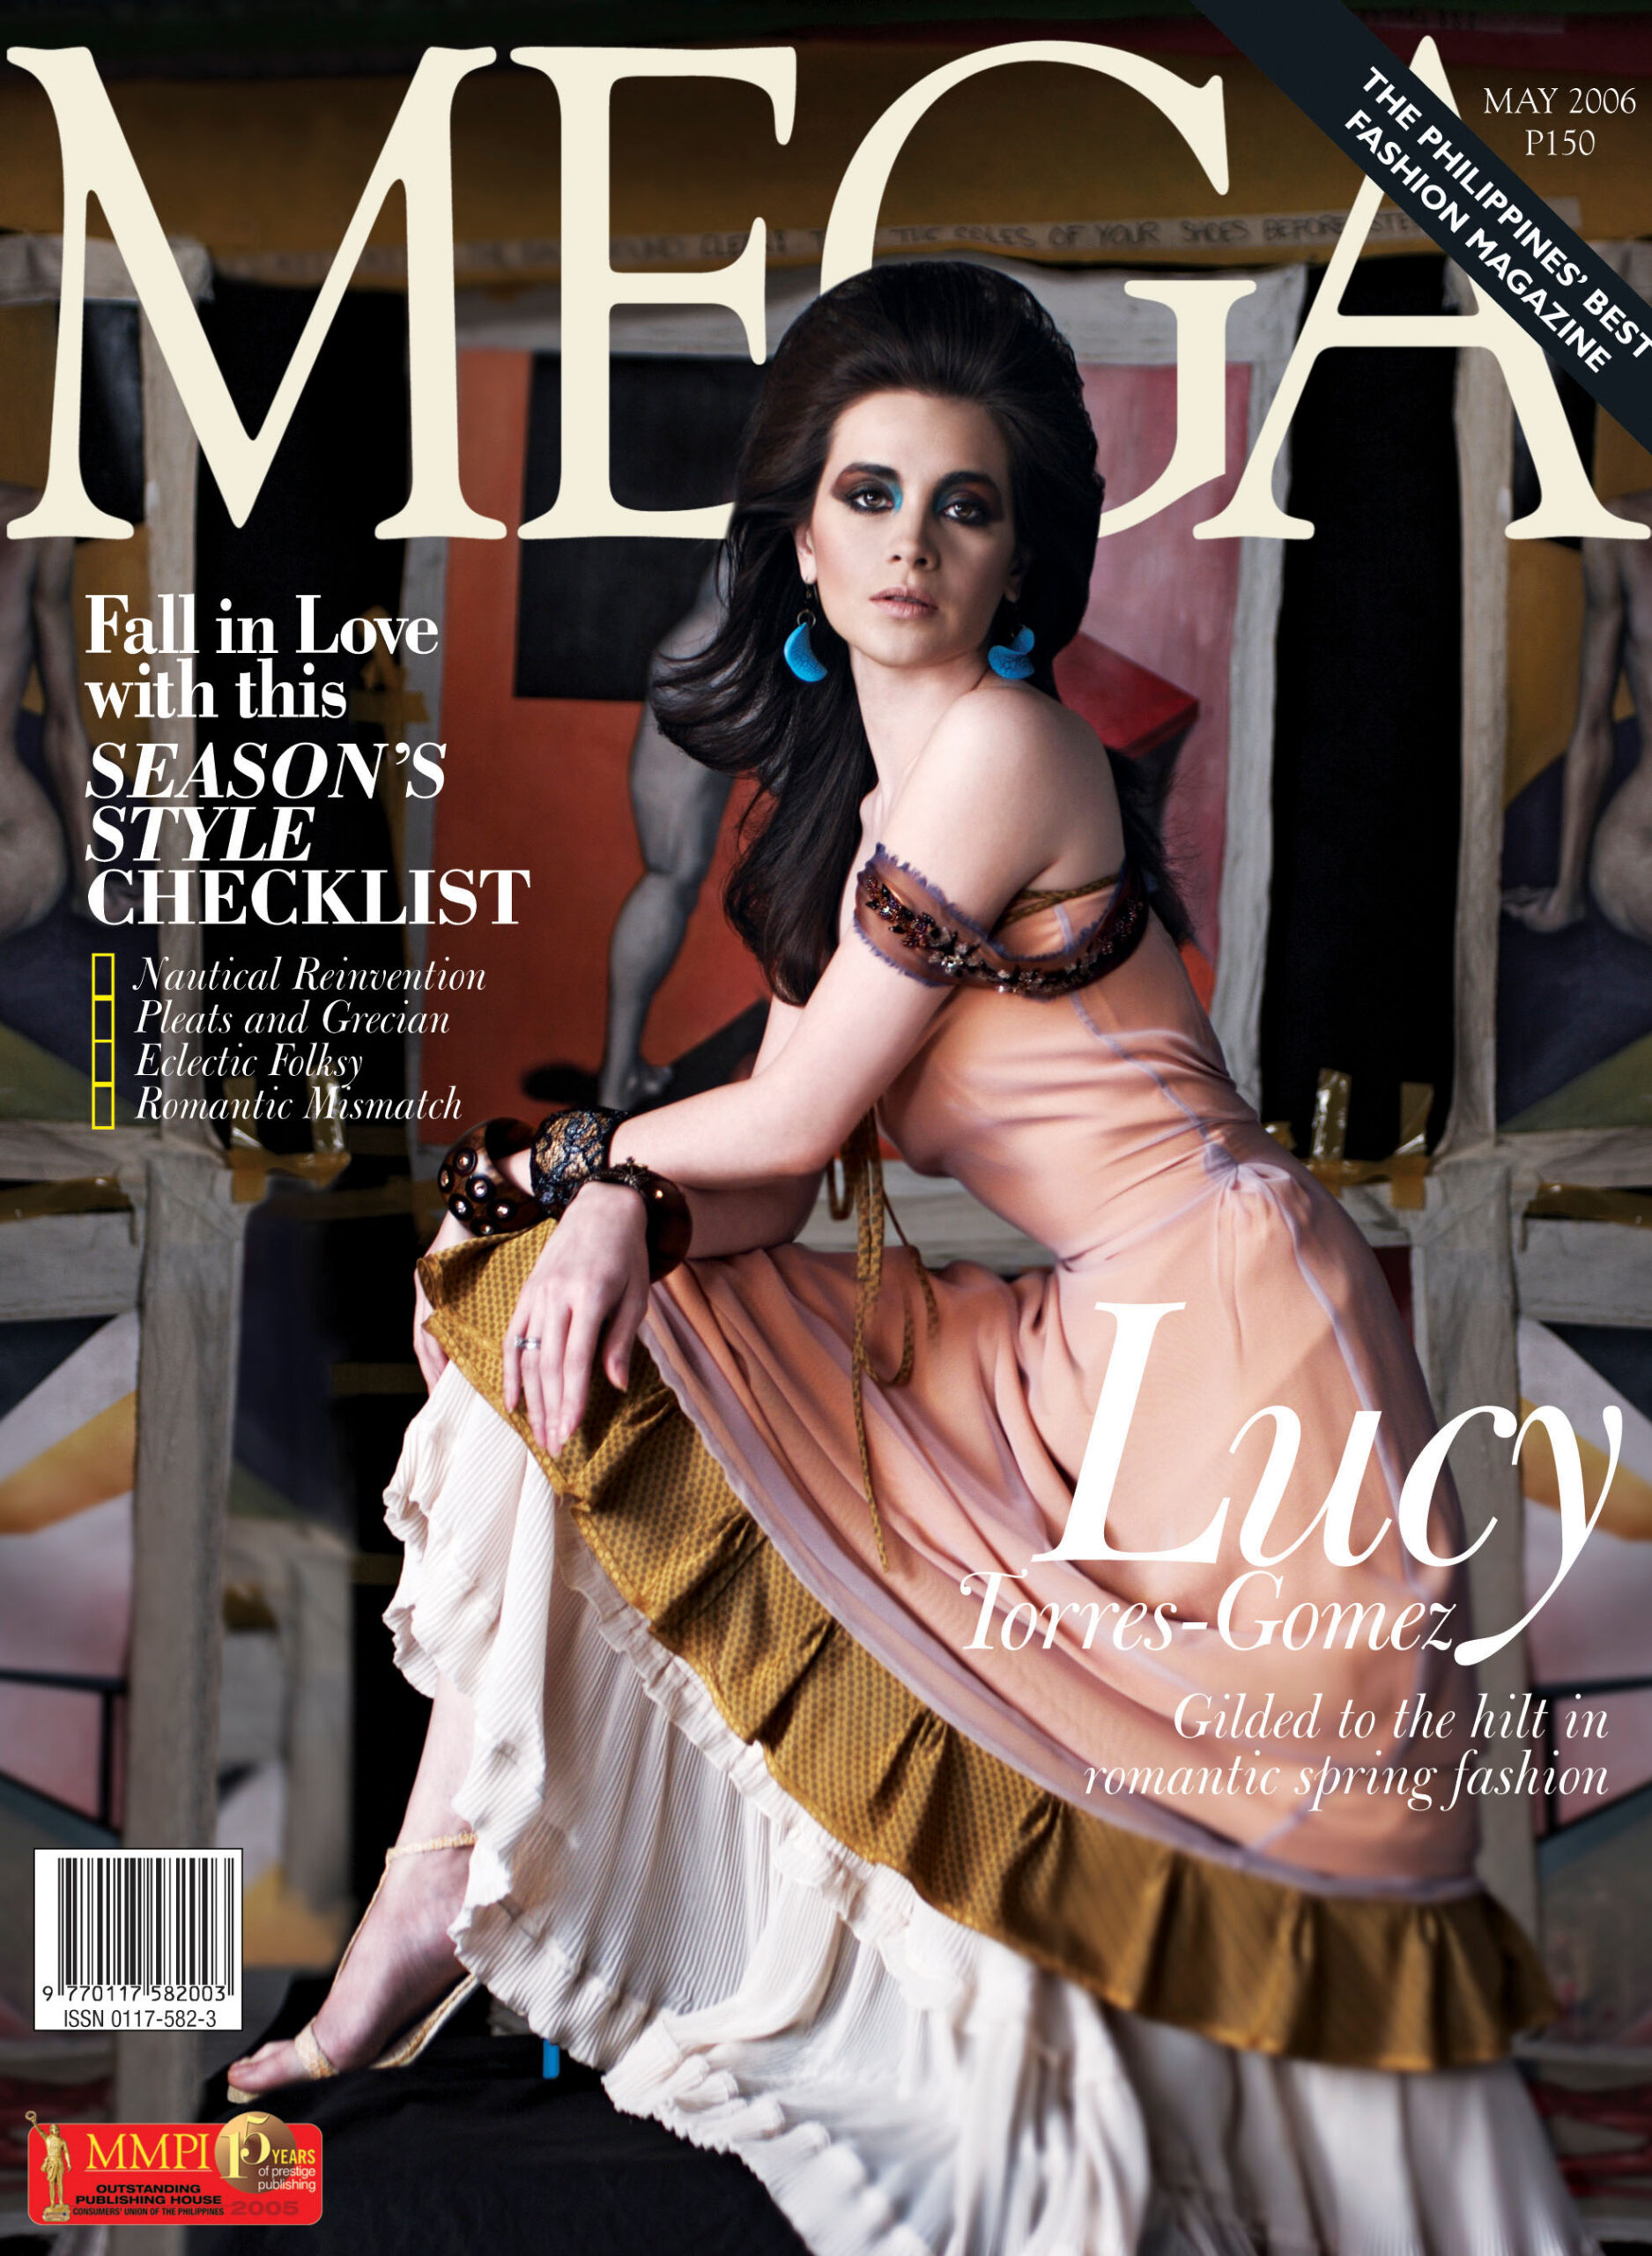 Lucy Torres-Gomez takes center stage in MEGA's May 2006 issue